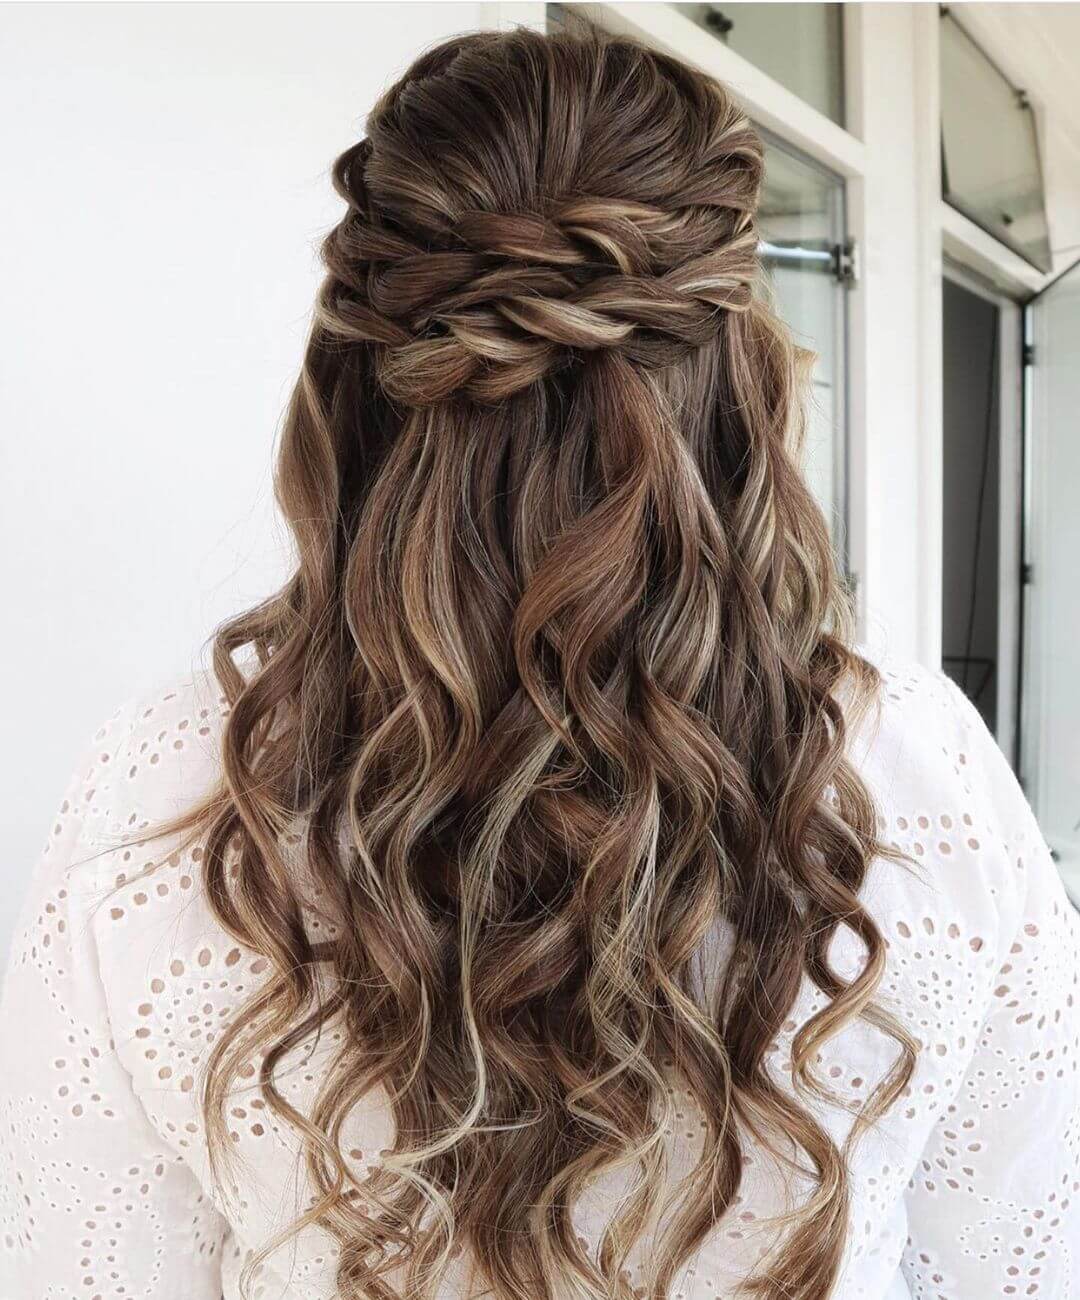 These Stunning Open Hair Bridal Hairstyles are perfect for your prewedding  functions  Real Wedding Stories  Wedding Blog